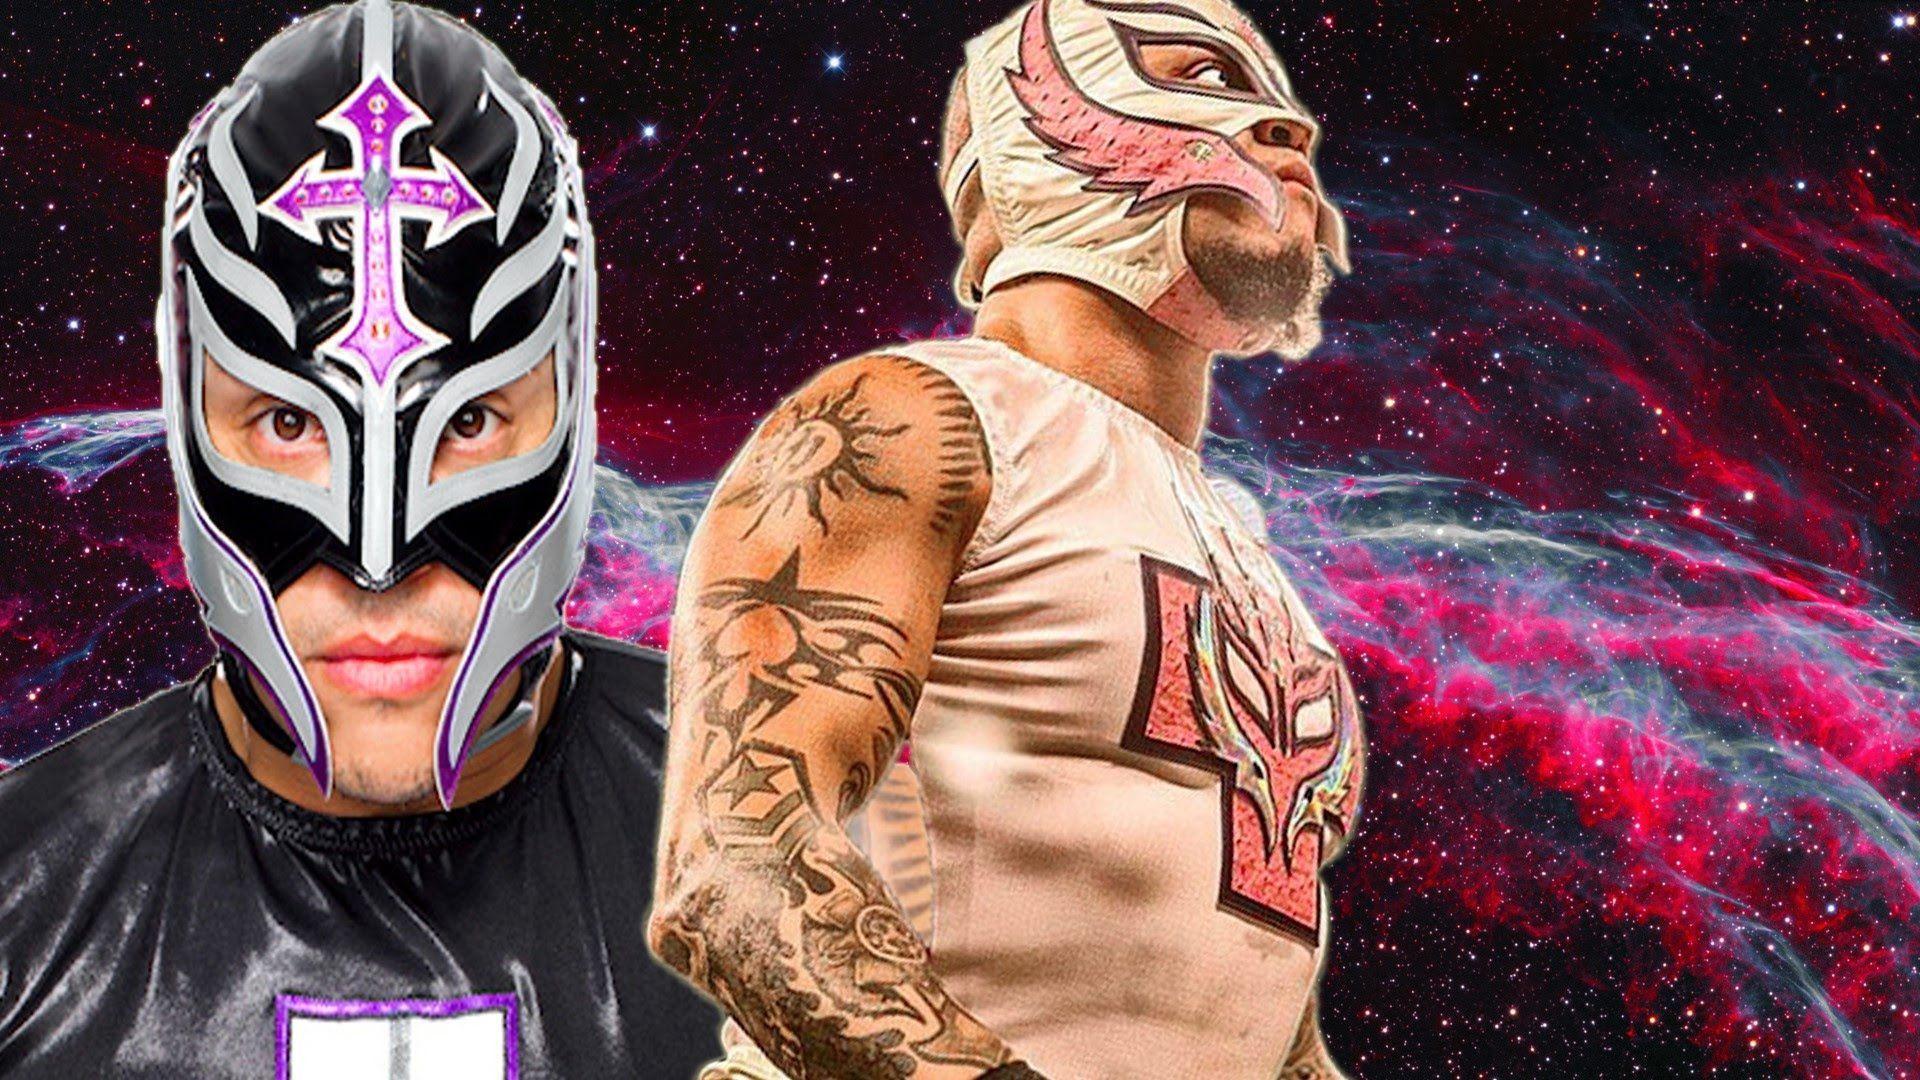 WWE AAA L.U Rey Mysterio "Without You" HD